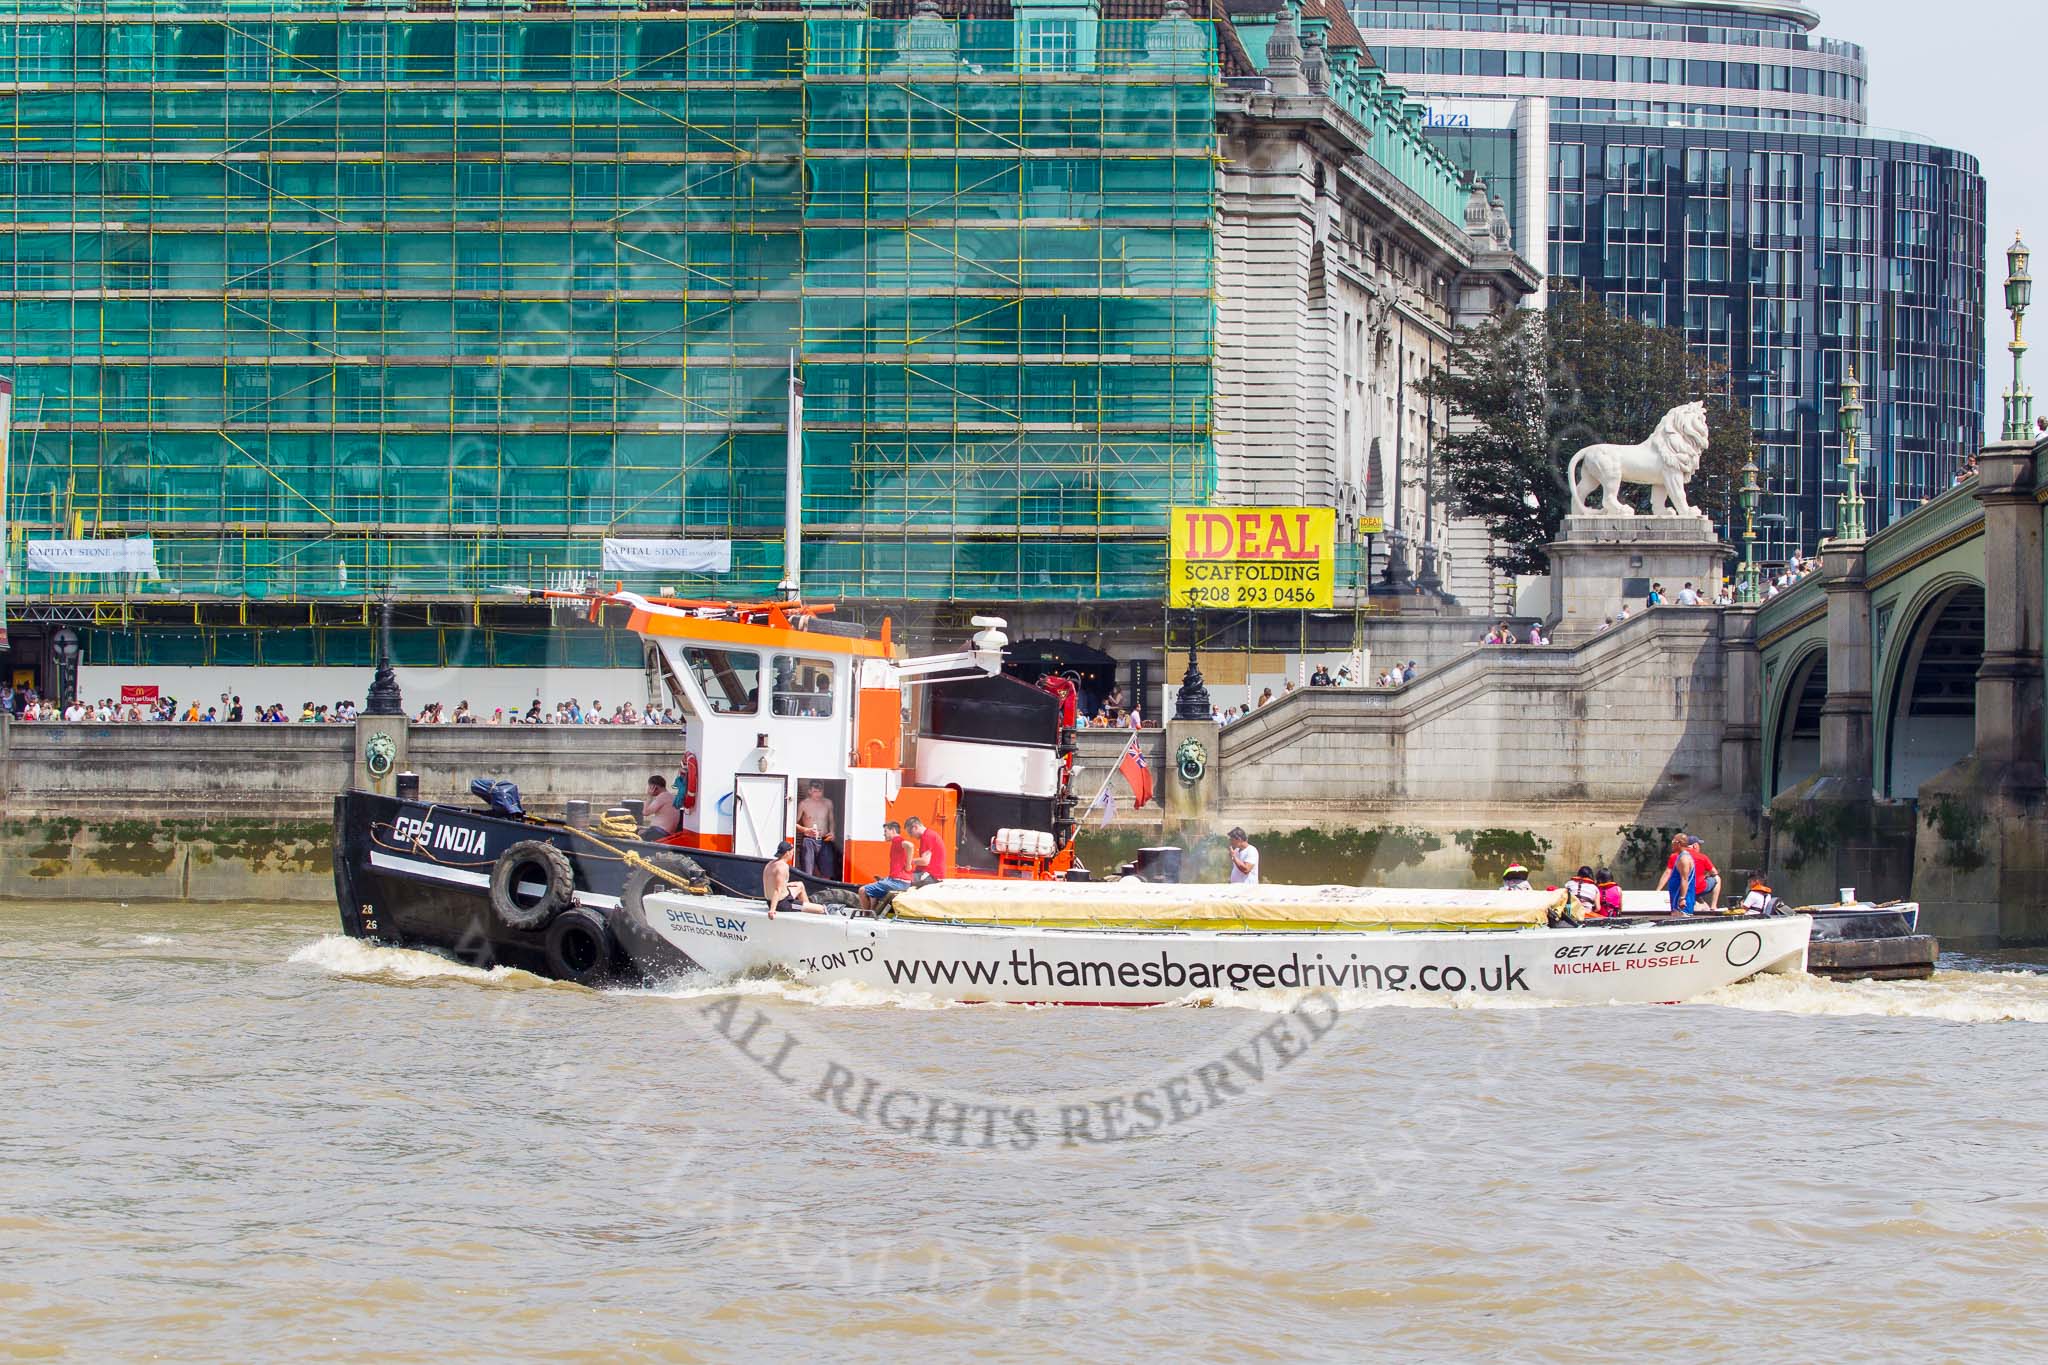 TOW River Thames Barge Driving Race 2013: GPS Marine tug "GPS India", pulling barge "Benjamin", by London Party Boats, and barge "Shell Bay" by South Dock Marina, back to Greenwich..
River Thames between Greenwich and Westminster,
London,

United Kingdom,
on 13 July 2013 at 14:40, image #505